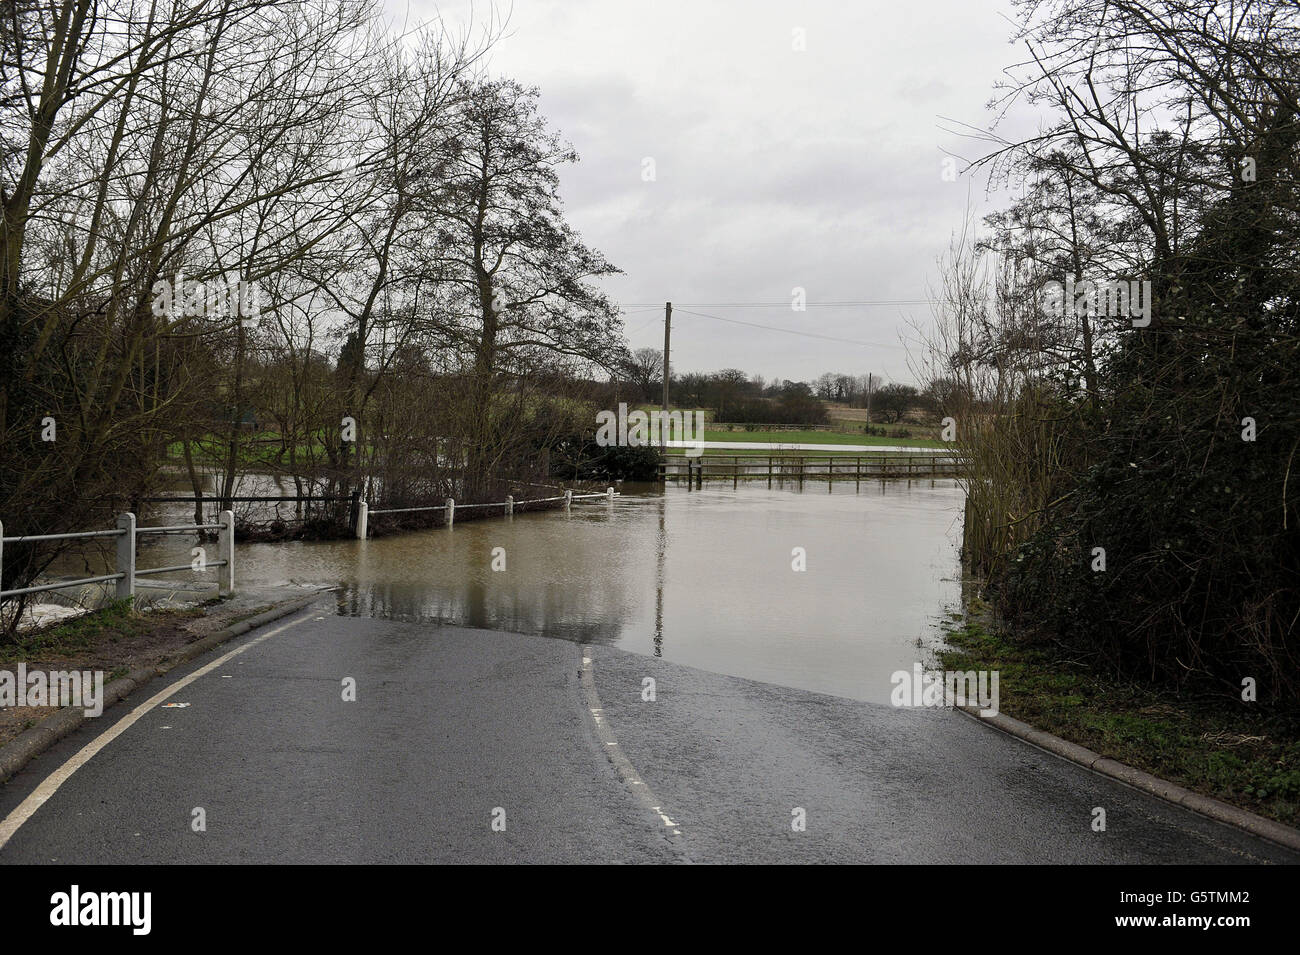 The River Chelmer, floods the roadway at Paper Mill Lock, Little Baddow, Essex as recent snowmelt from surrounding fields raised the river's volume. Stock Photo